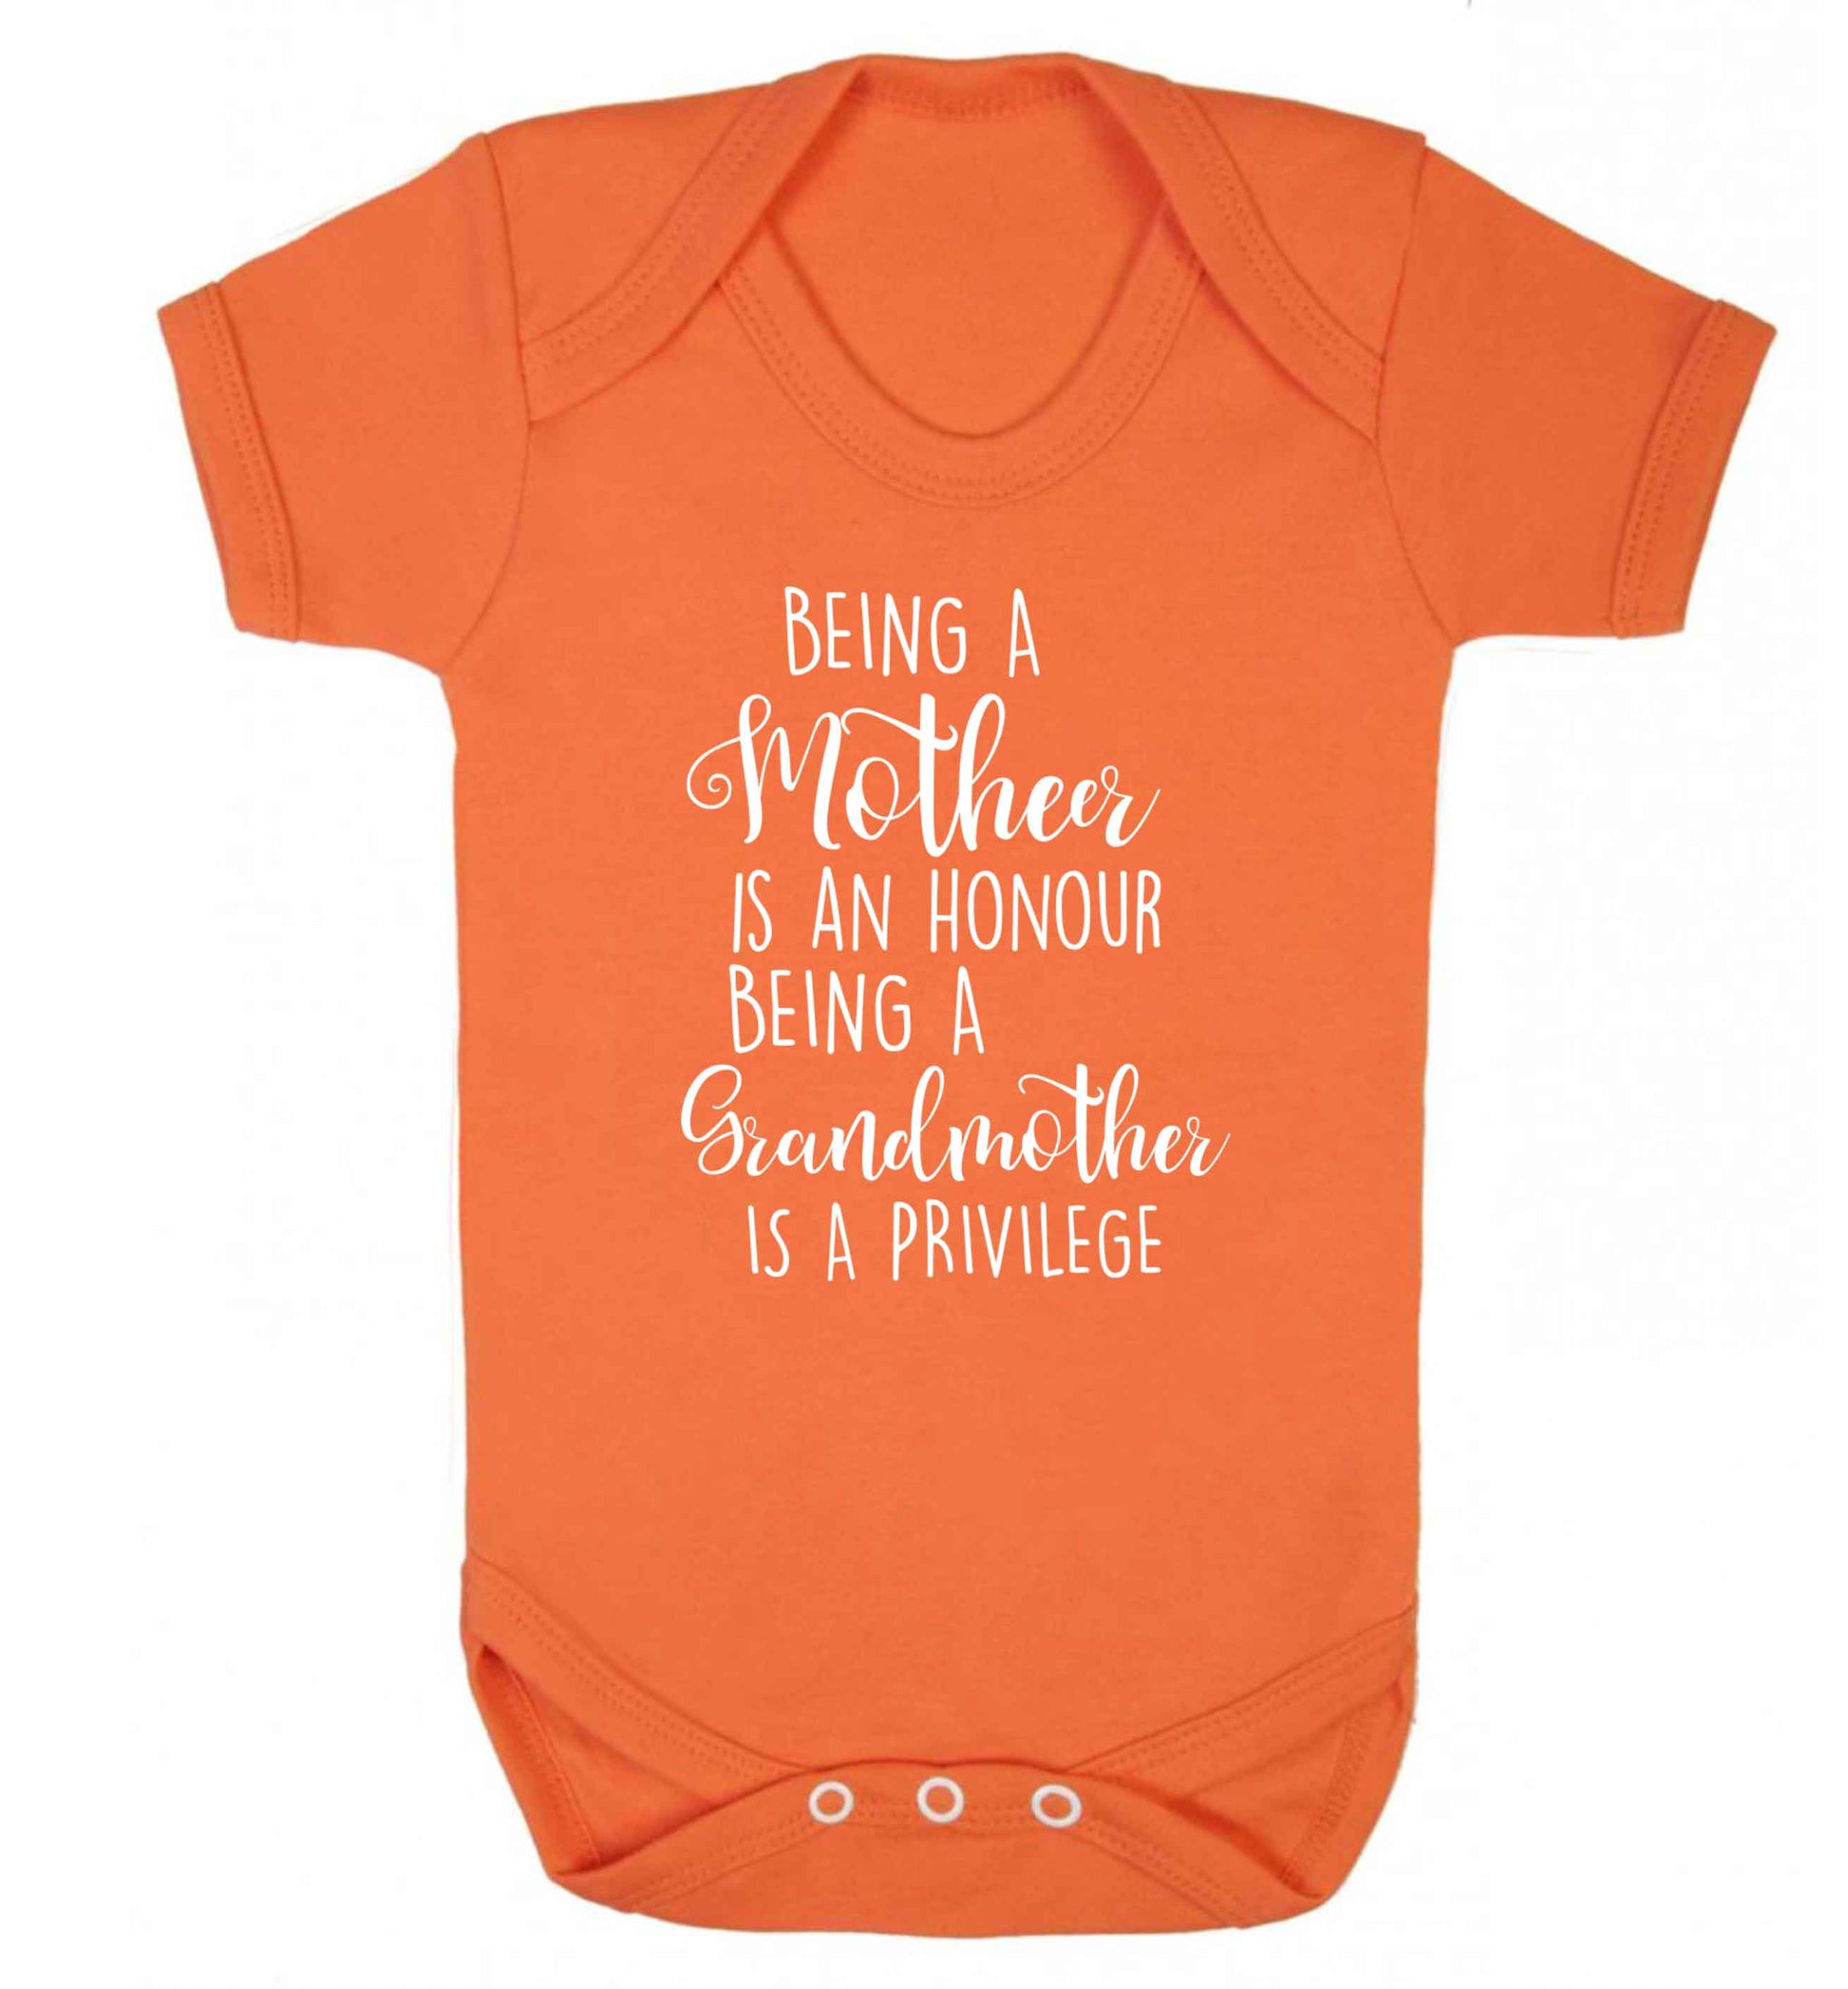 Being a mother is an honour being an grandmother is a privilege Baby Vest orange 18-24 months